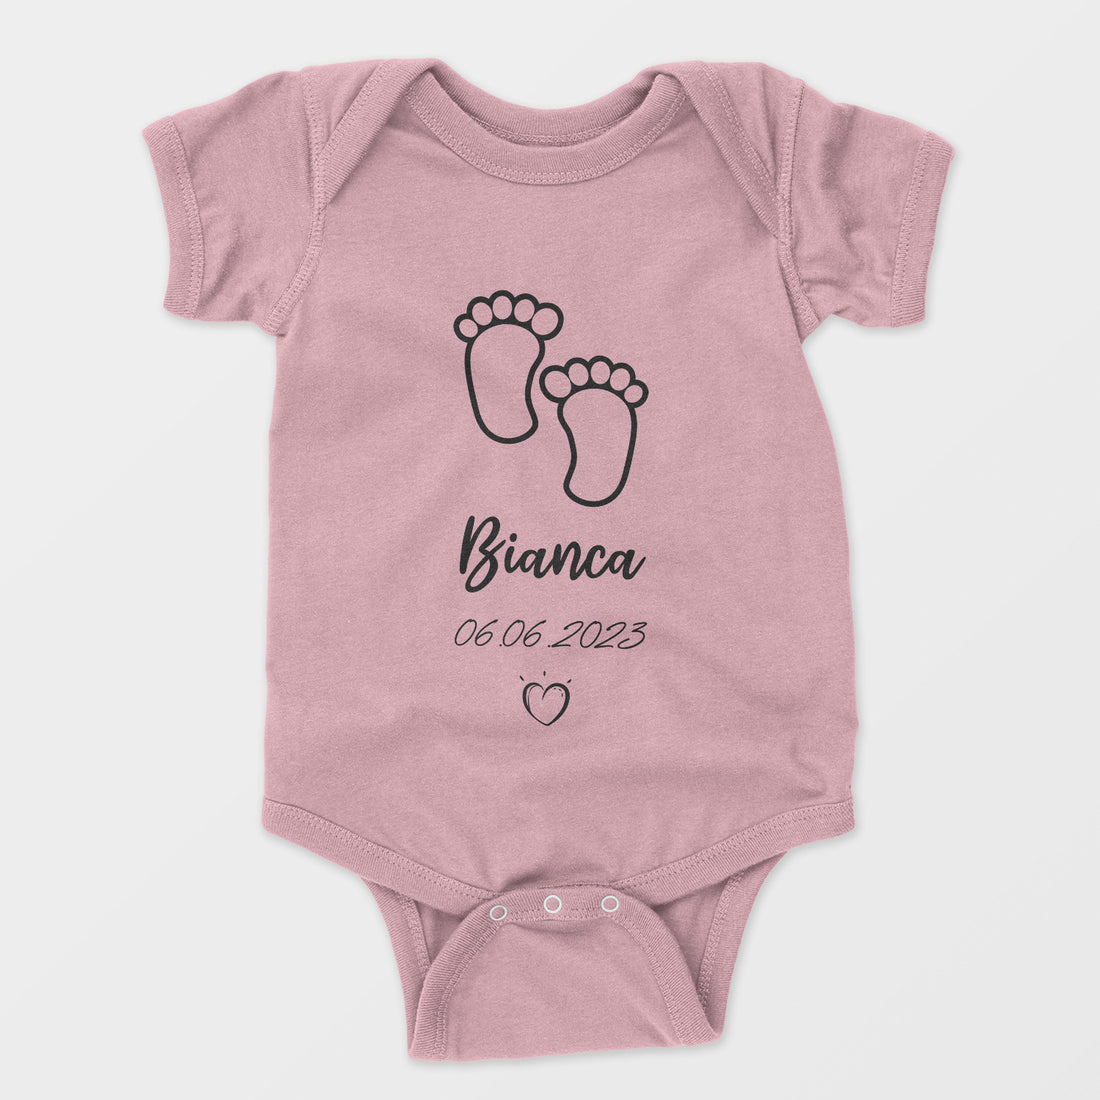 Personalized Bodysuit Onesie For Newborn Baby Feet With Name And Date